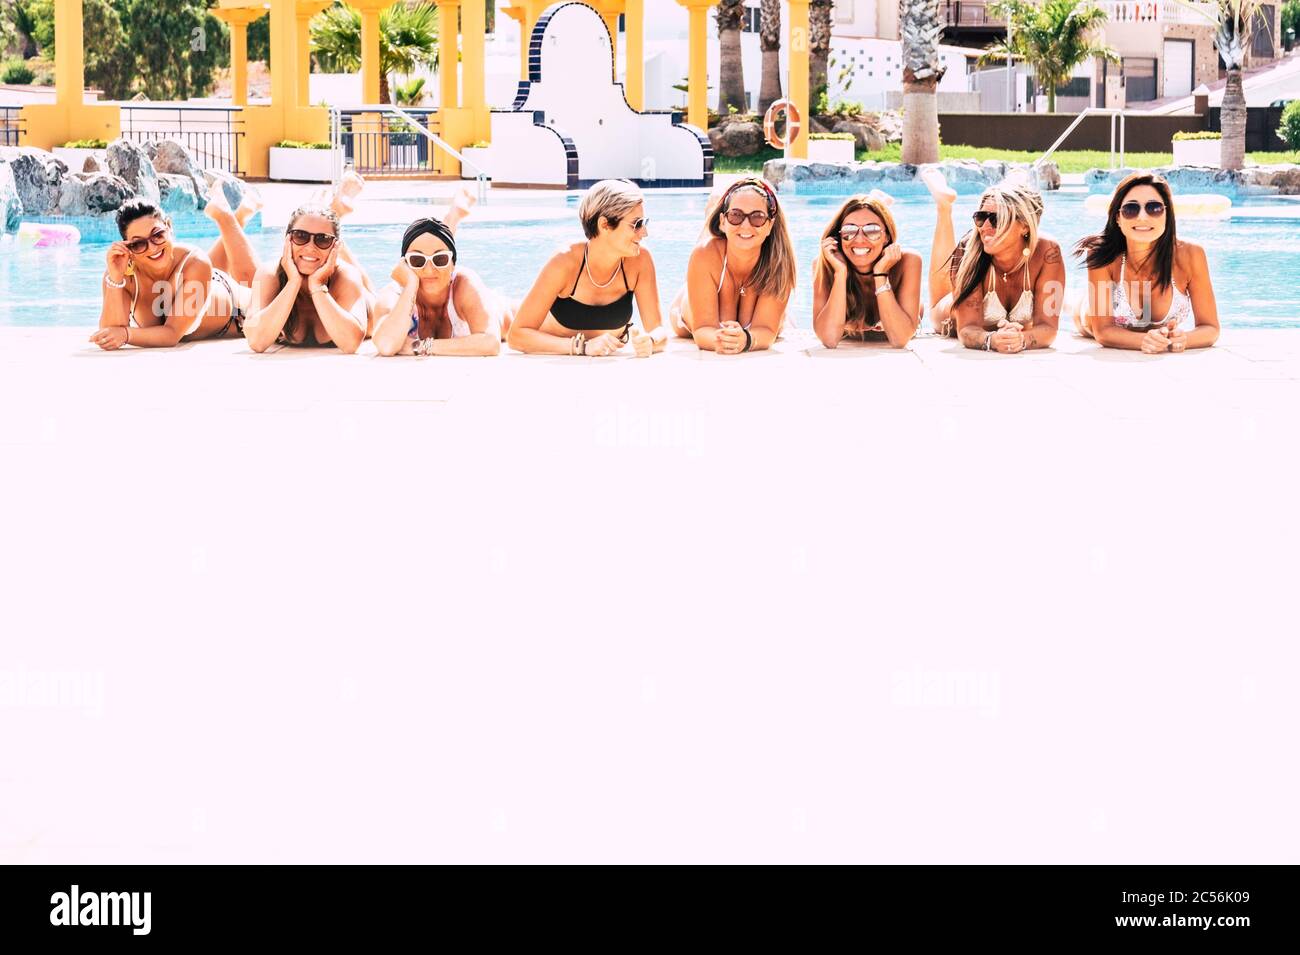 Summer holiday vacation for caucasian women friends - group of young females lay down at the pool enjoying the hot season together in friendship - hap Stock Photo